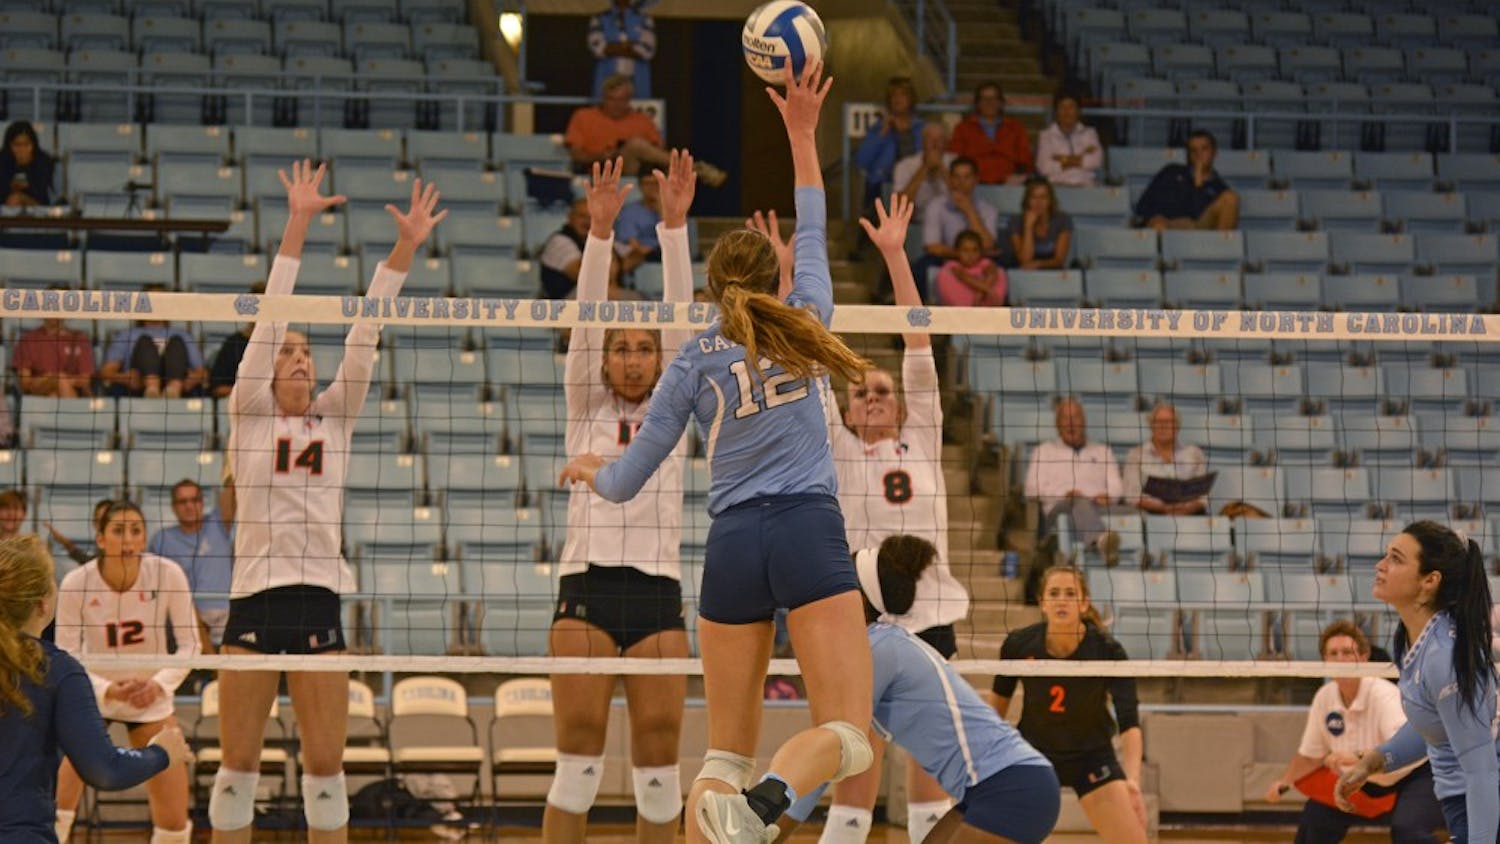 UNC Freshman Julia Scoles (12) spikes the ball against Miami players during the Tar Heels' 3-0 victory over UNC on Sunday, October 9.